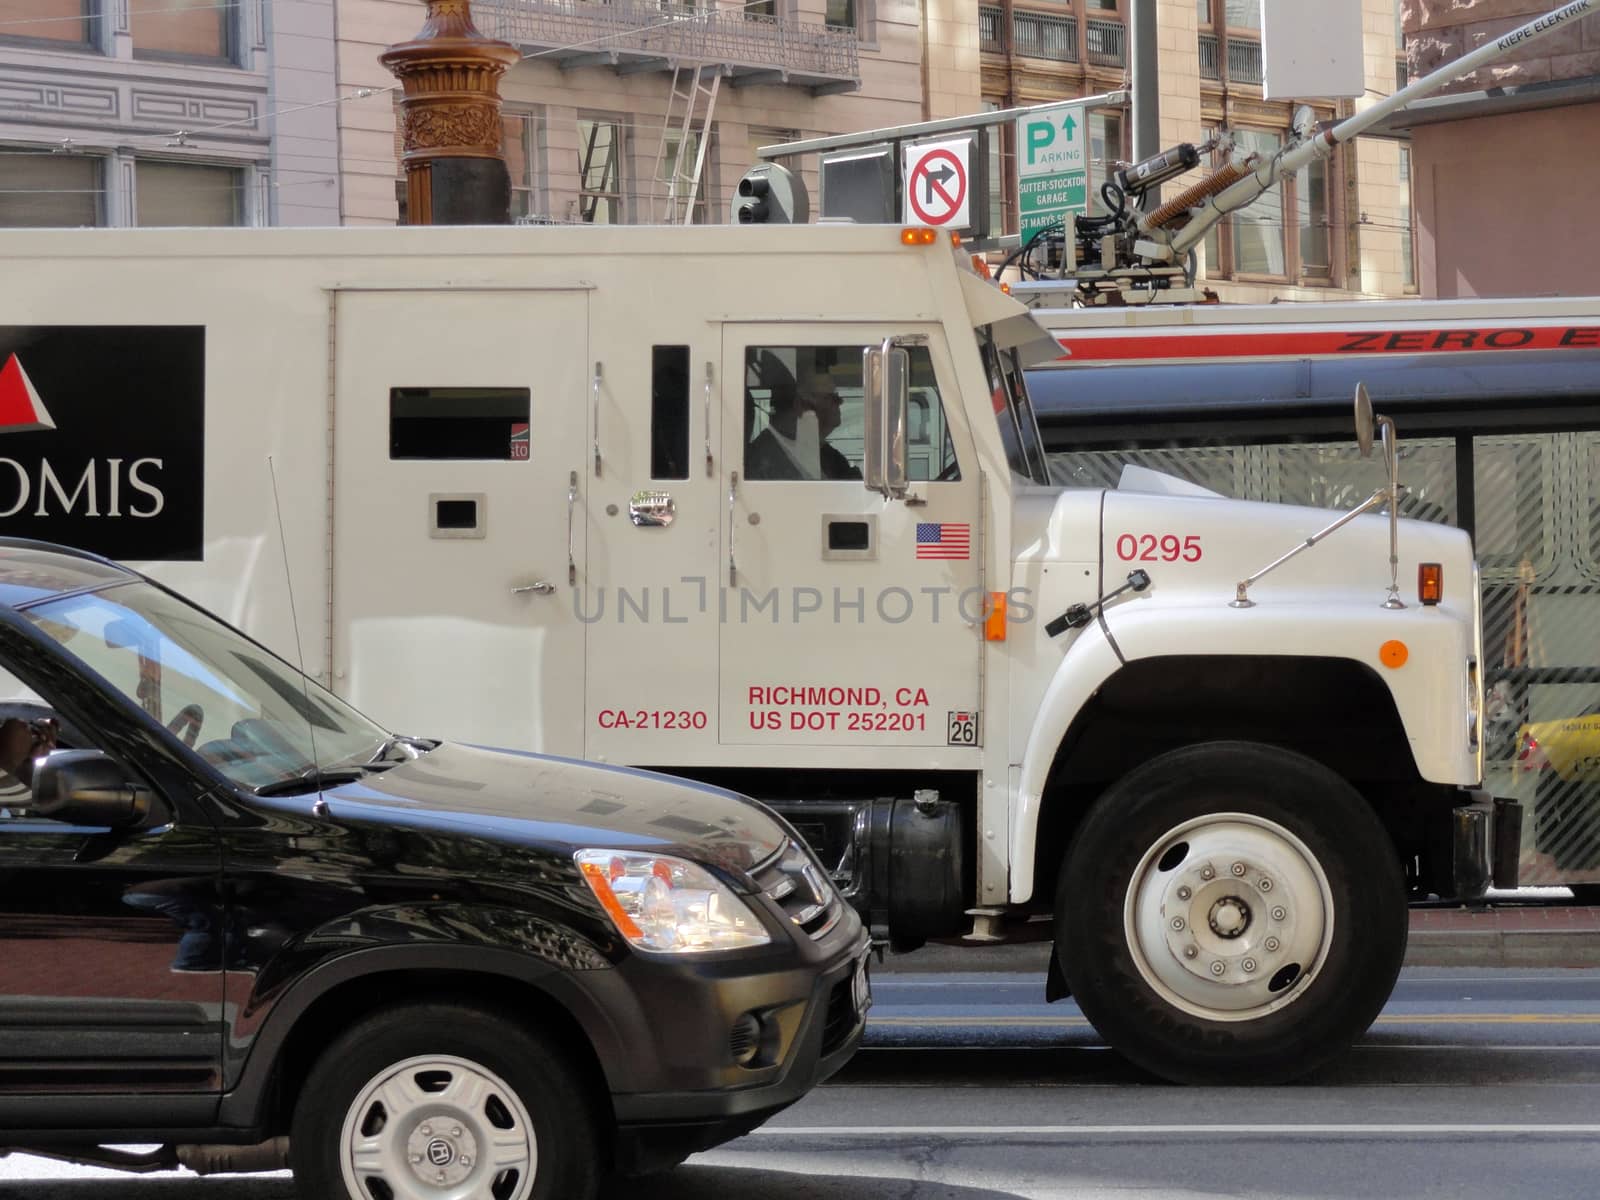 San Francisco, USA - July 23 2010: An Armored Loomis car, in the streets of San Francisco. Loomis is an International Cash handling company   